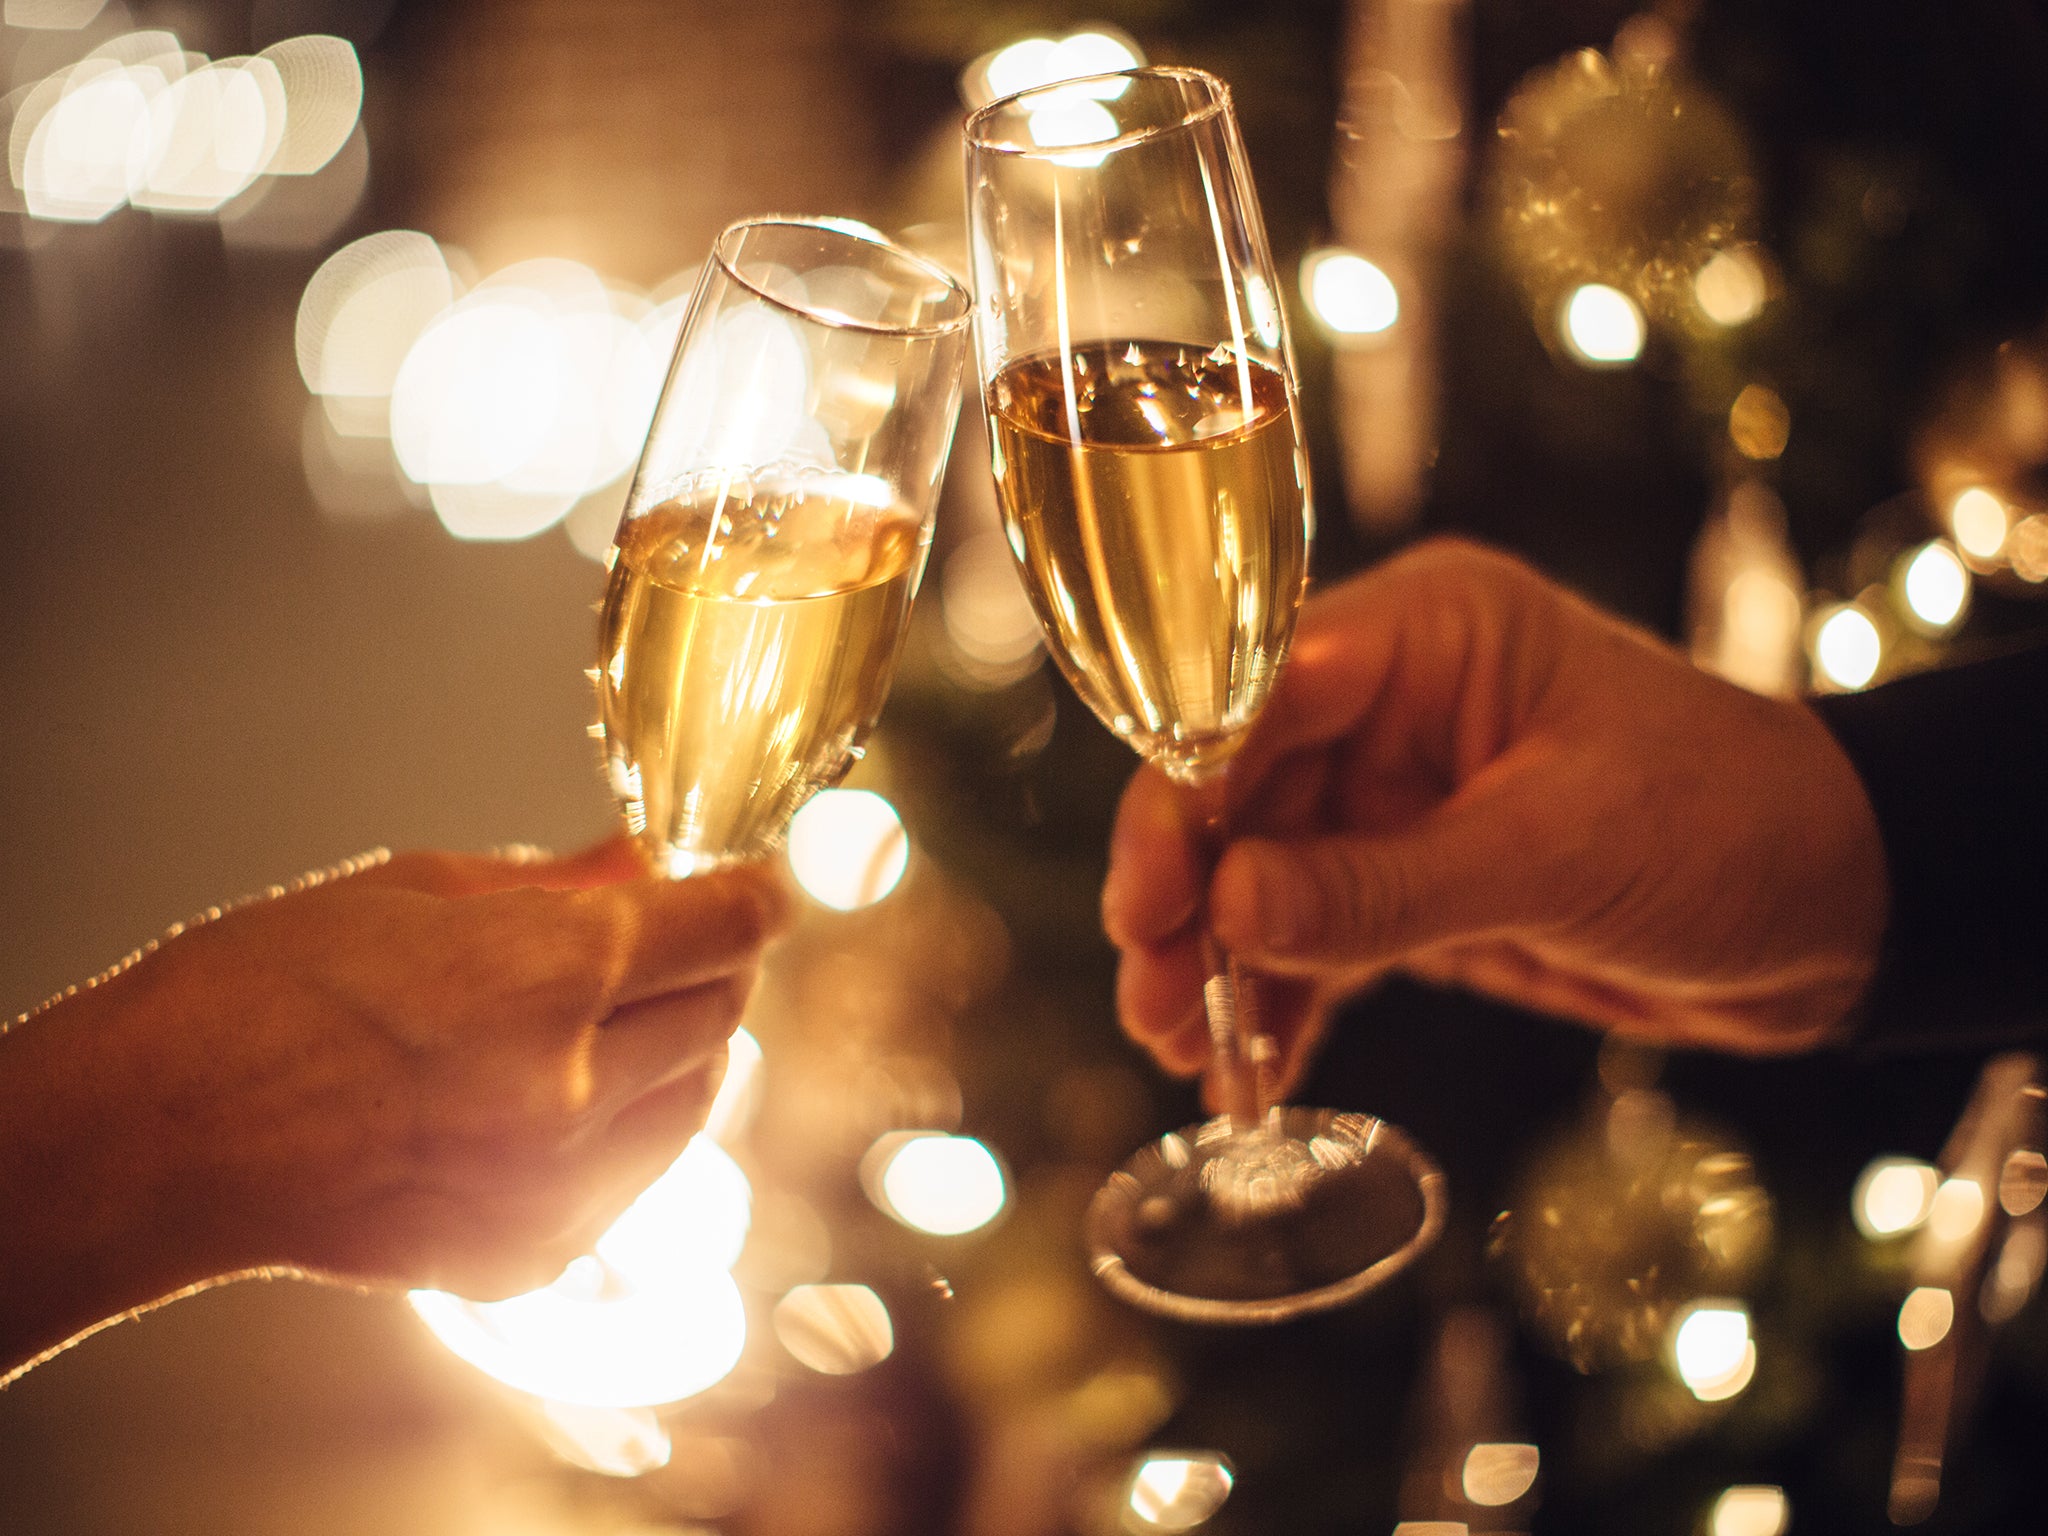 We’ve been popping bubbly on special occasions since the 16th century